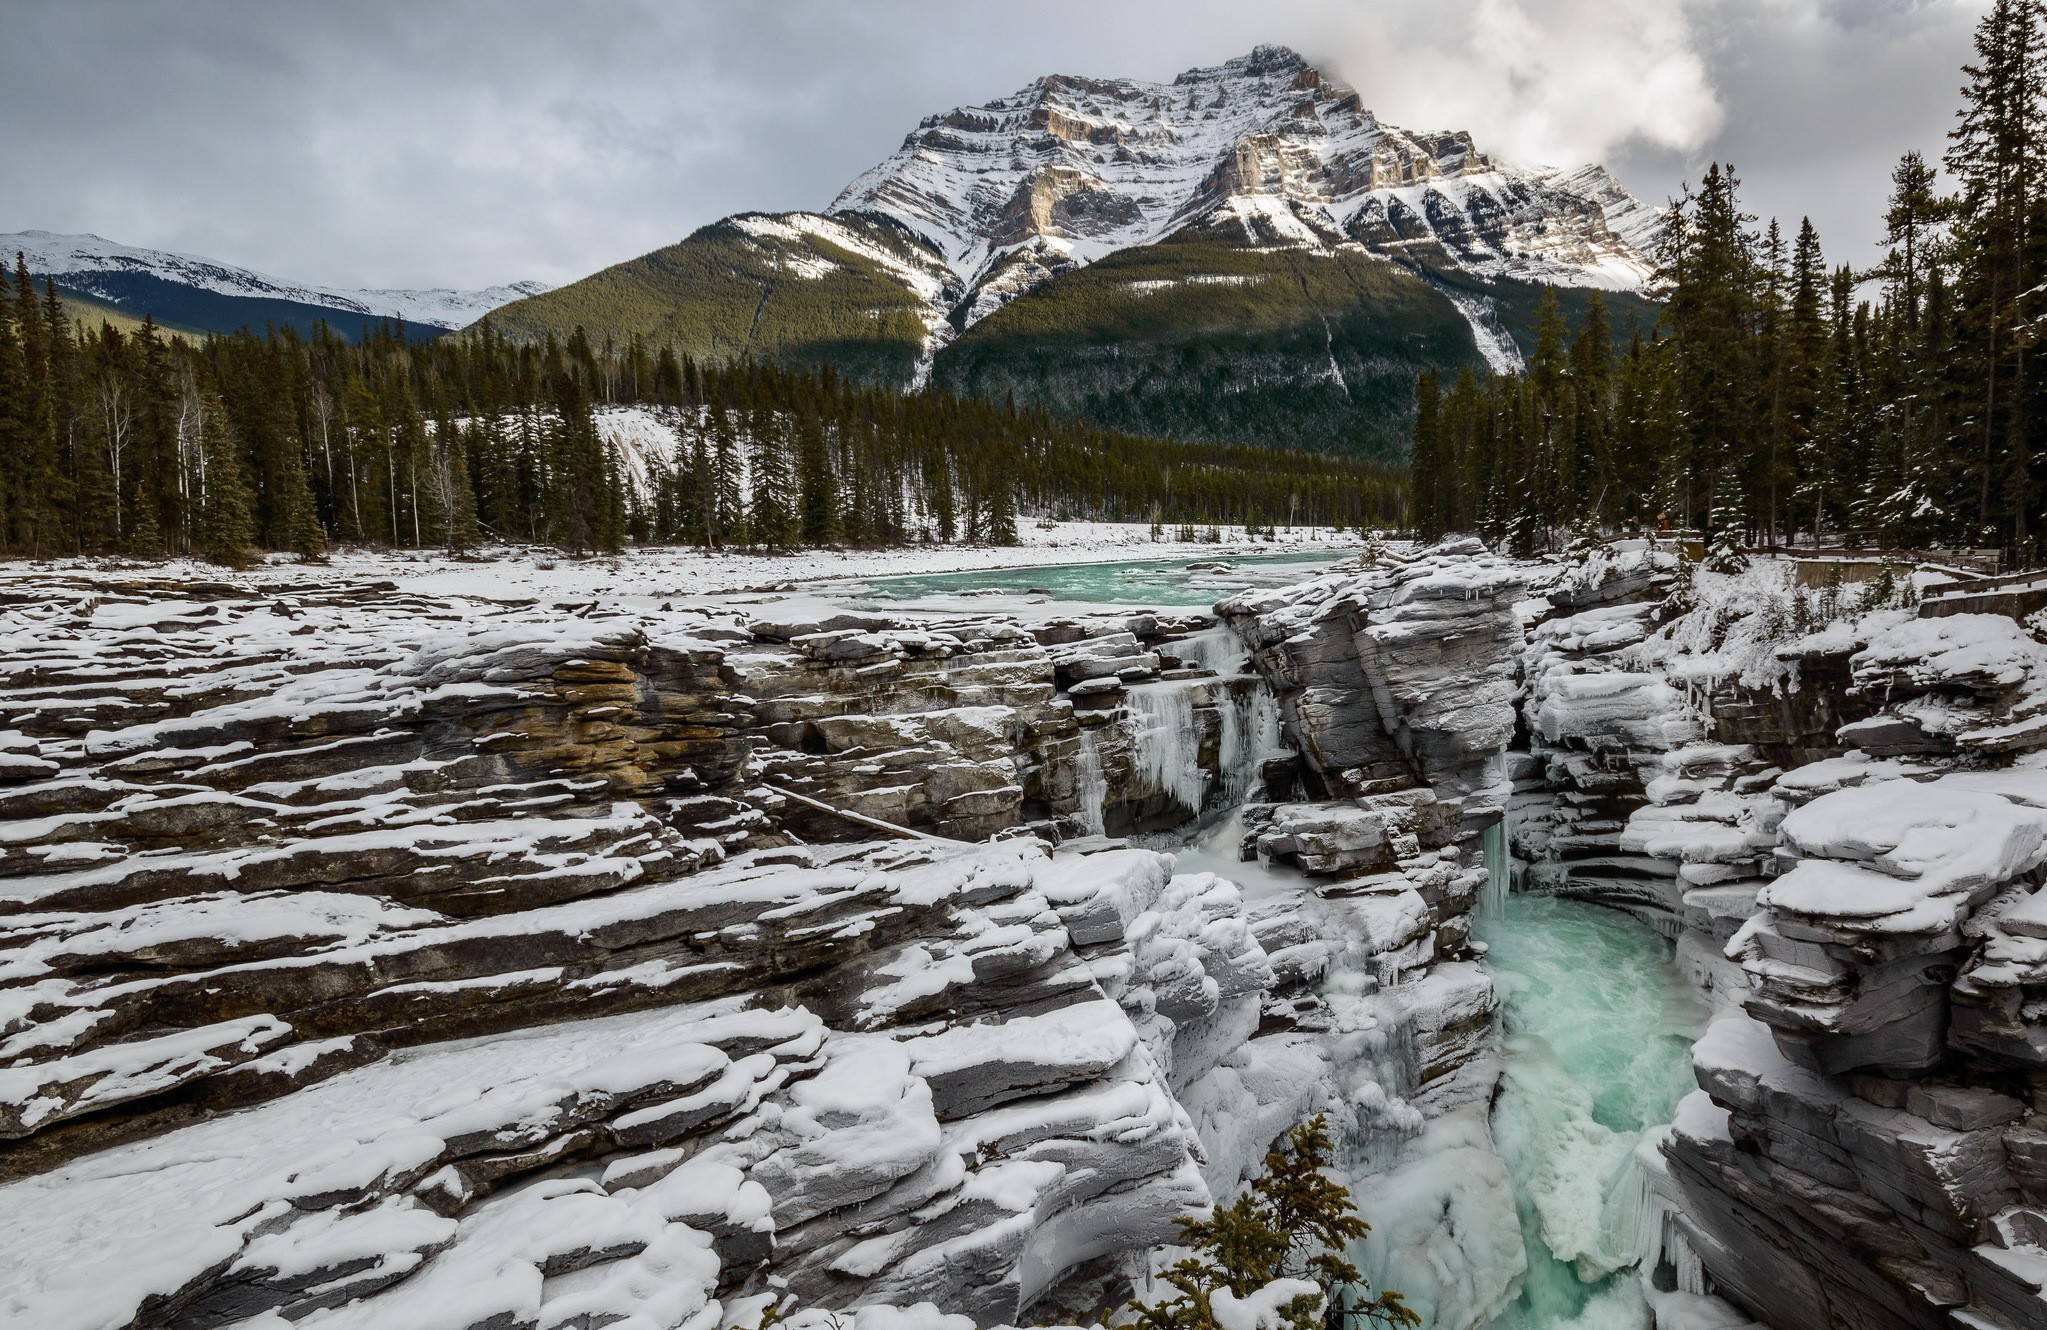 Landscape Mountains Winter Gorge River Jasper National Park Alberta Without People 2047x1330